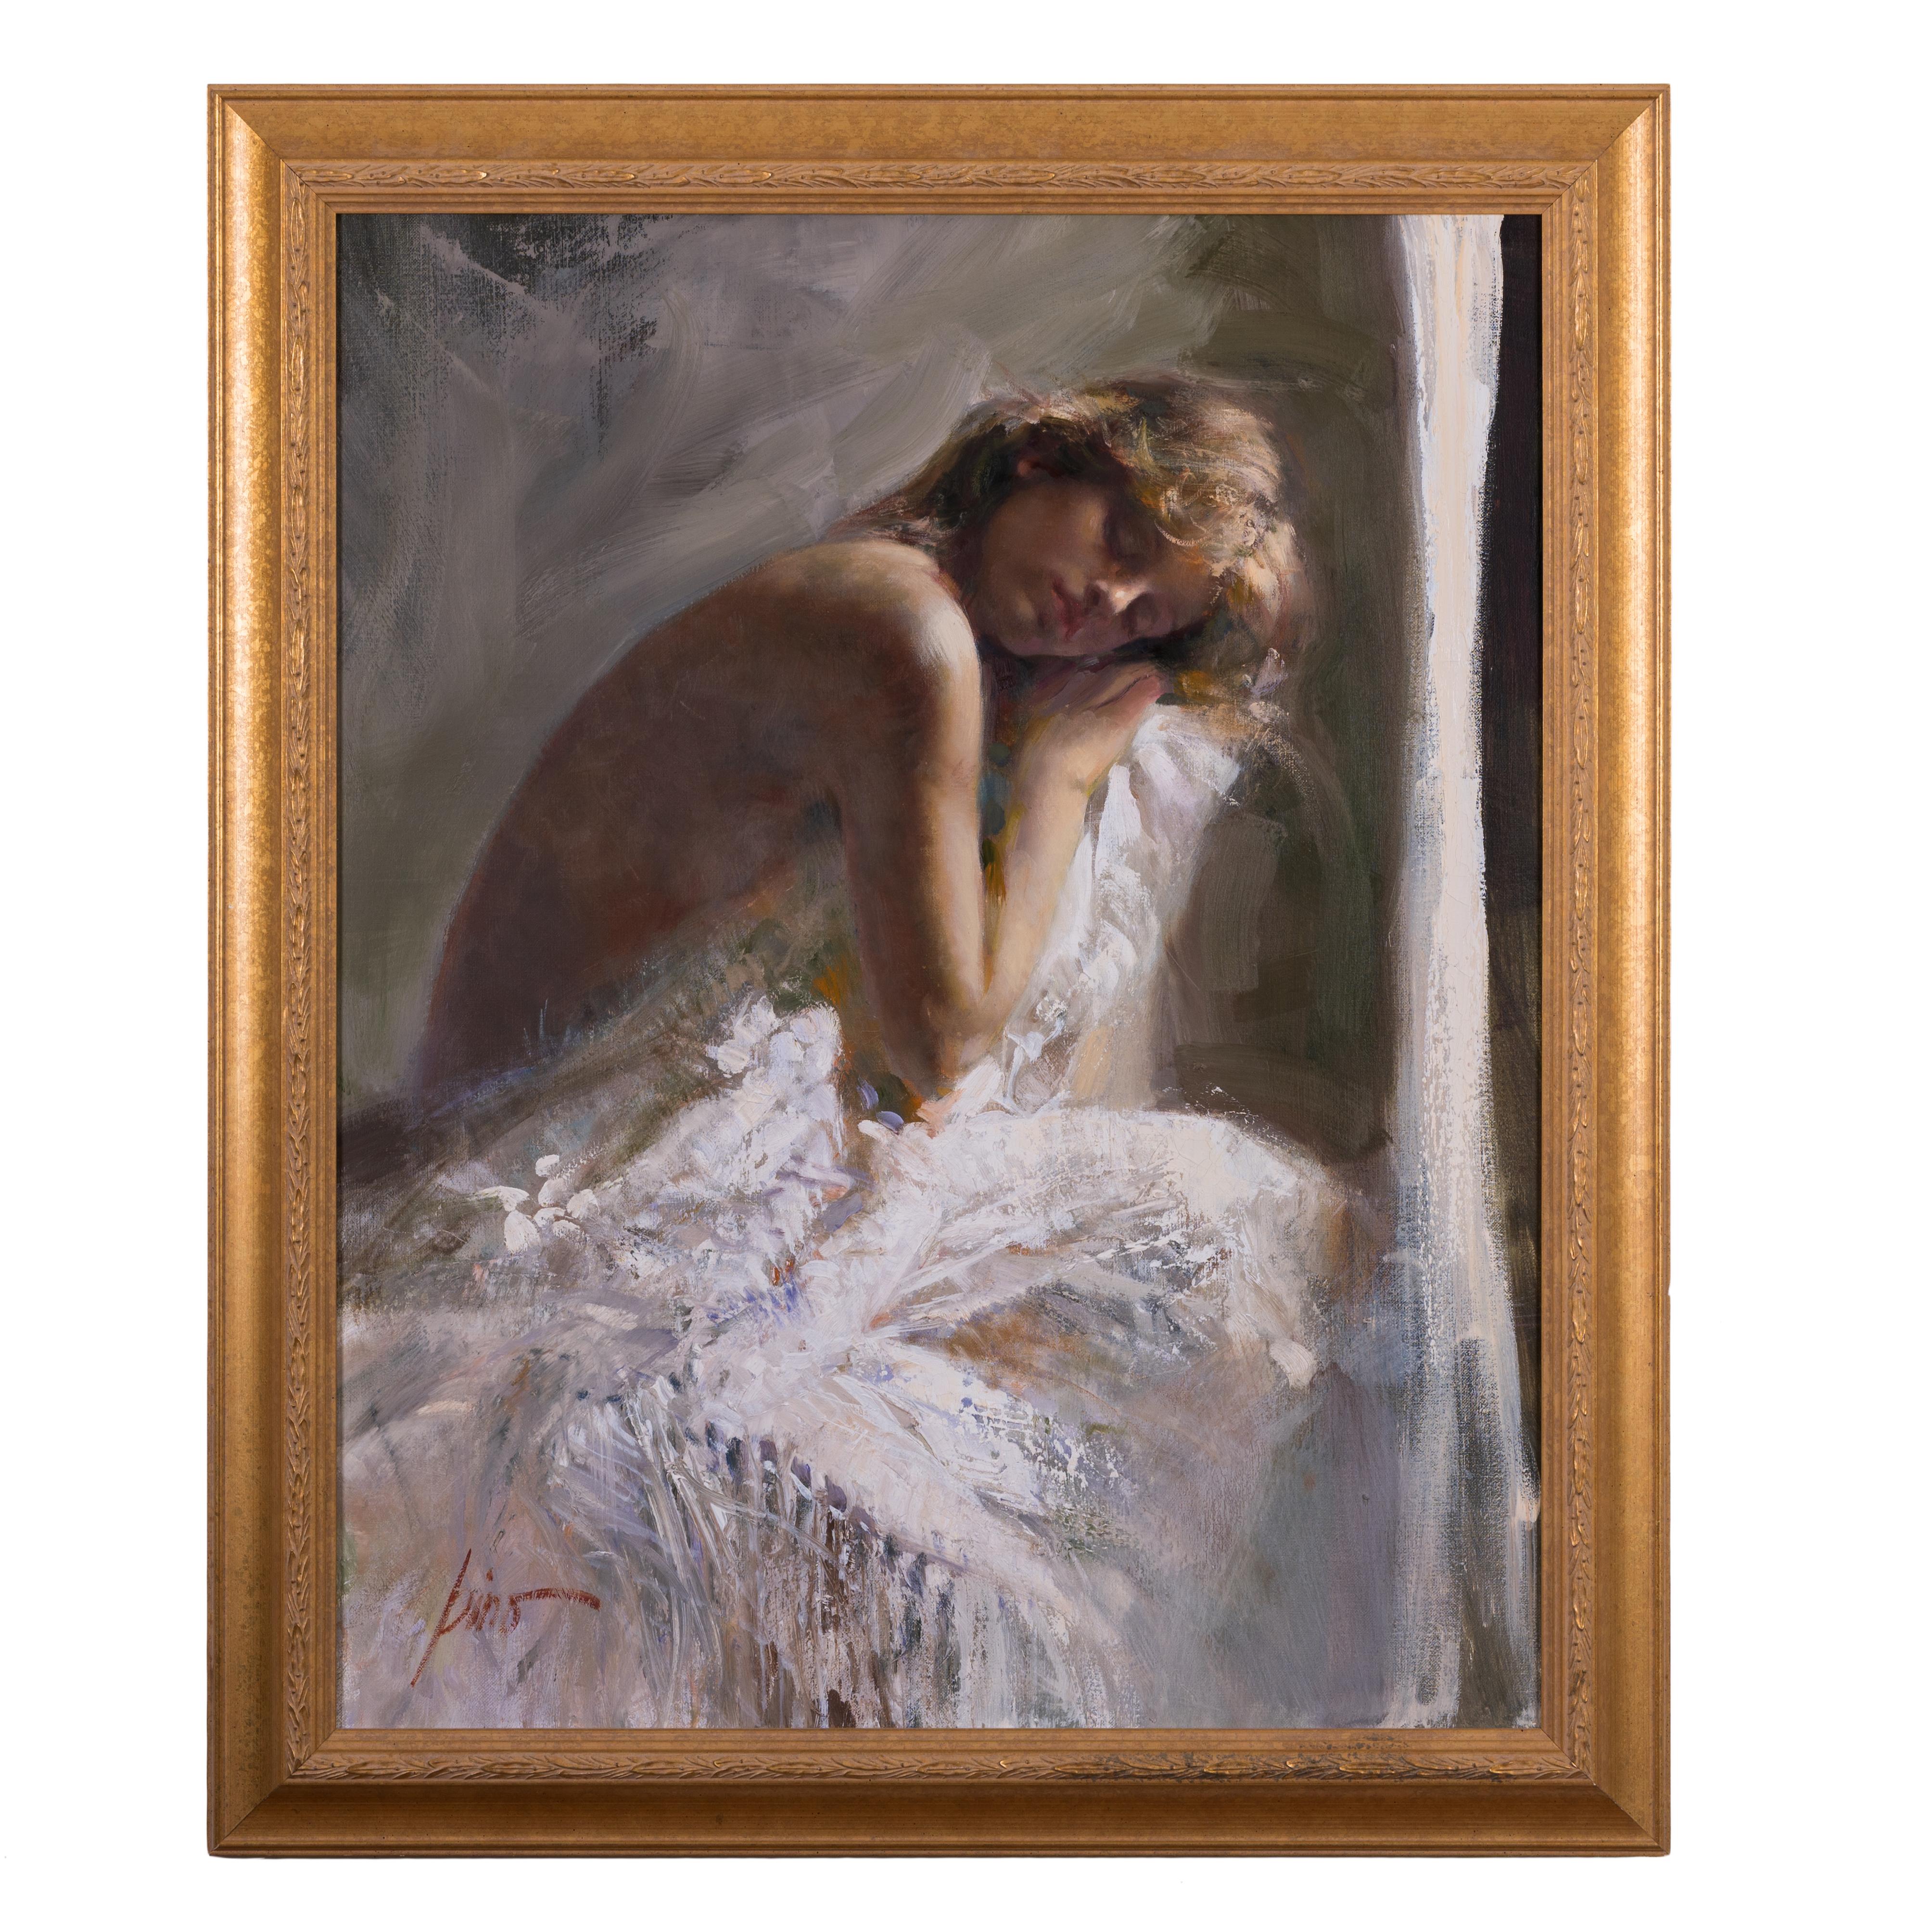 Pino Daeni
(Italian-American, 1939-2010)

In The Distance
oil on canvas 

Artist catalog reference MO#10.

canvas: 24 by 30 inches
frame: 28 ½ by 34 ½ inches

Provenance: Hilton Head Island estate; Morris & Whiteside Auctions, Hilton Head Island, SC.